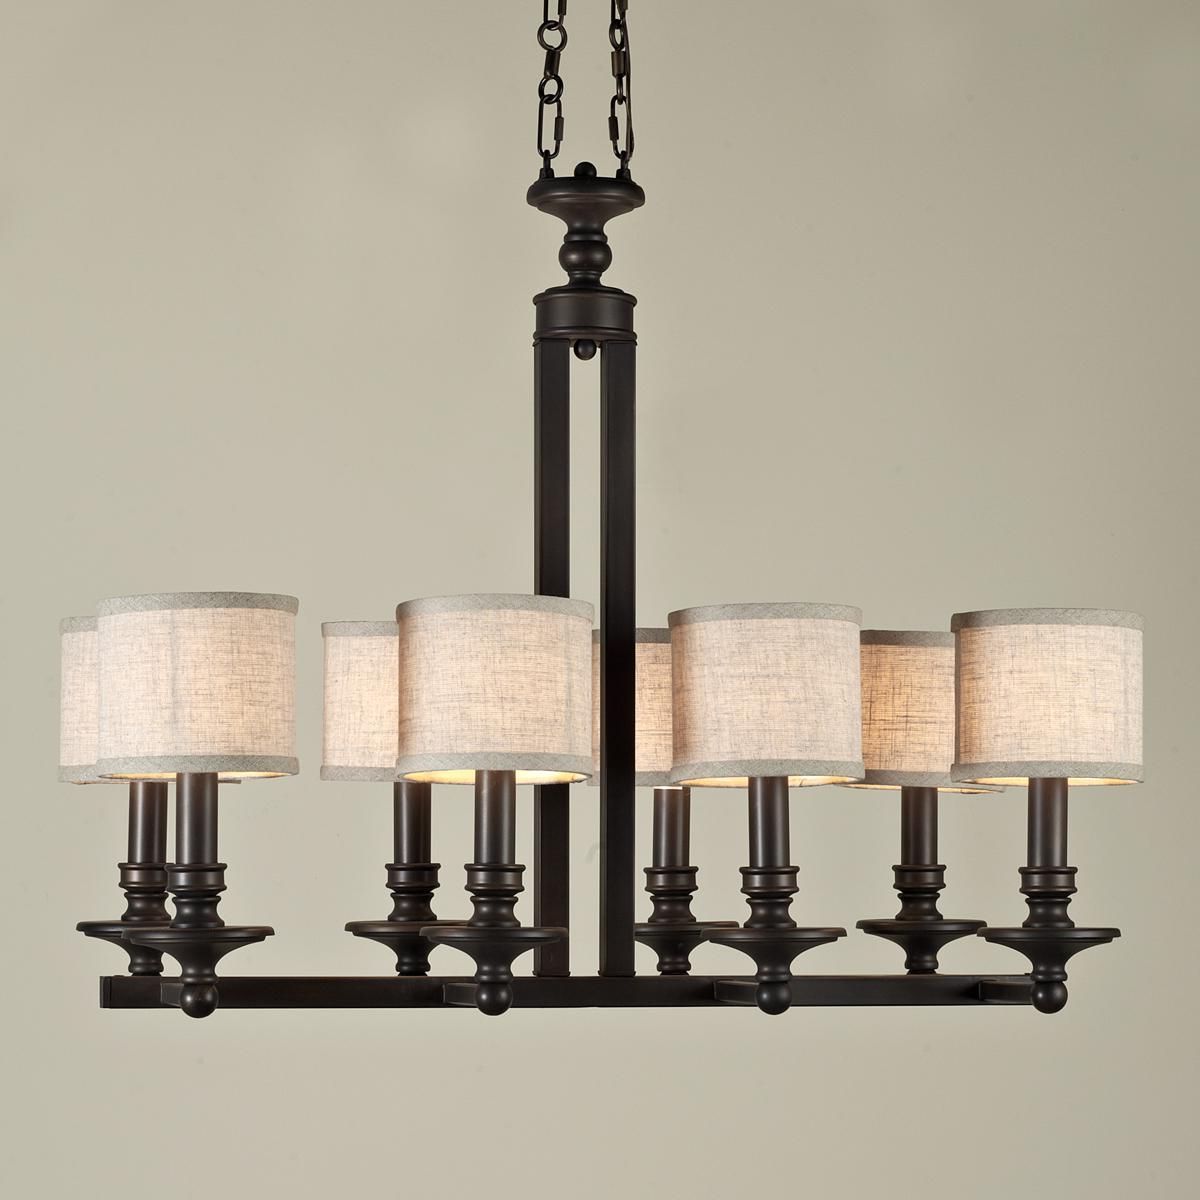 Favorite Springfield Linen Shade Island Chandelier (2 Finishes Within Oatmeal Linen Shade Chandeliers (View 10 of 20)